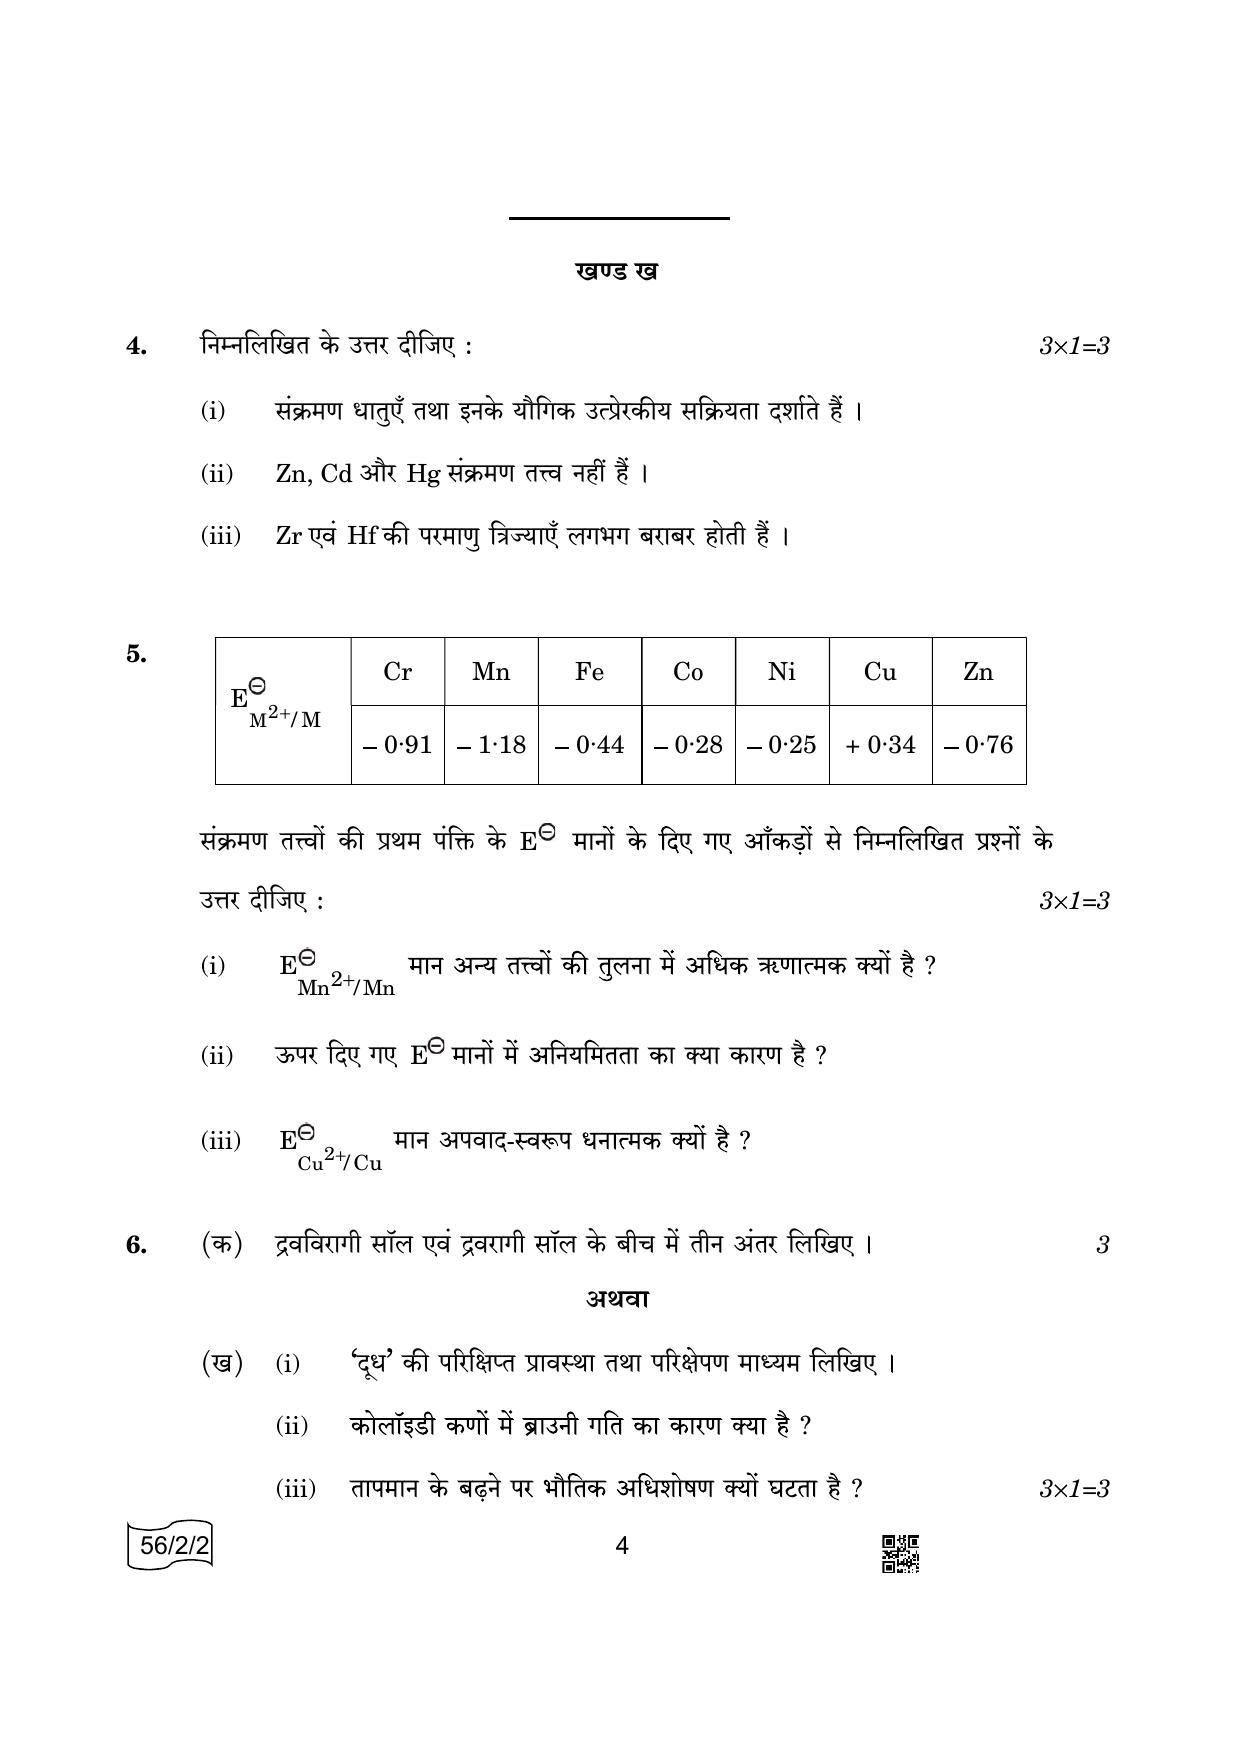 CBSE Class 12 56-2-2 Chemistry 2022 Question Paper - Page 4